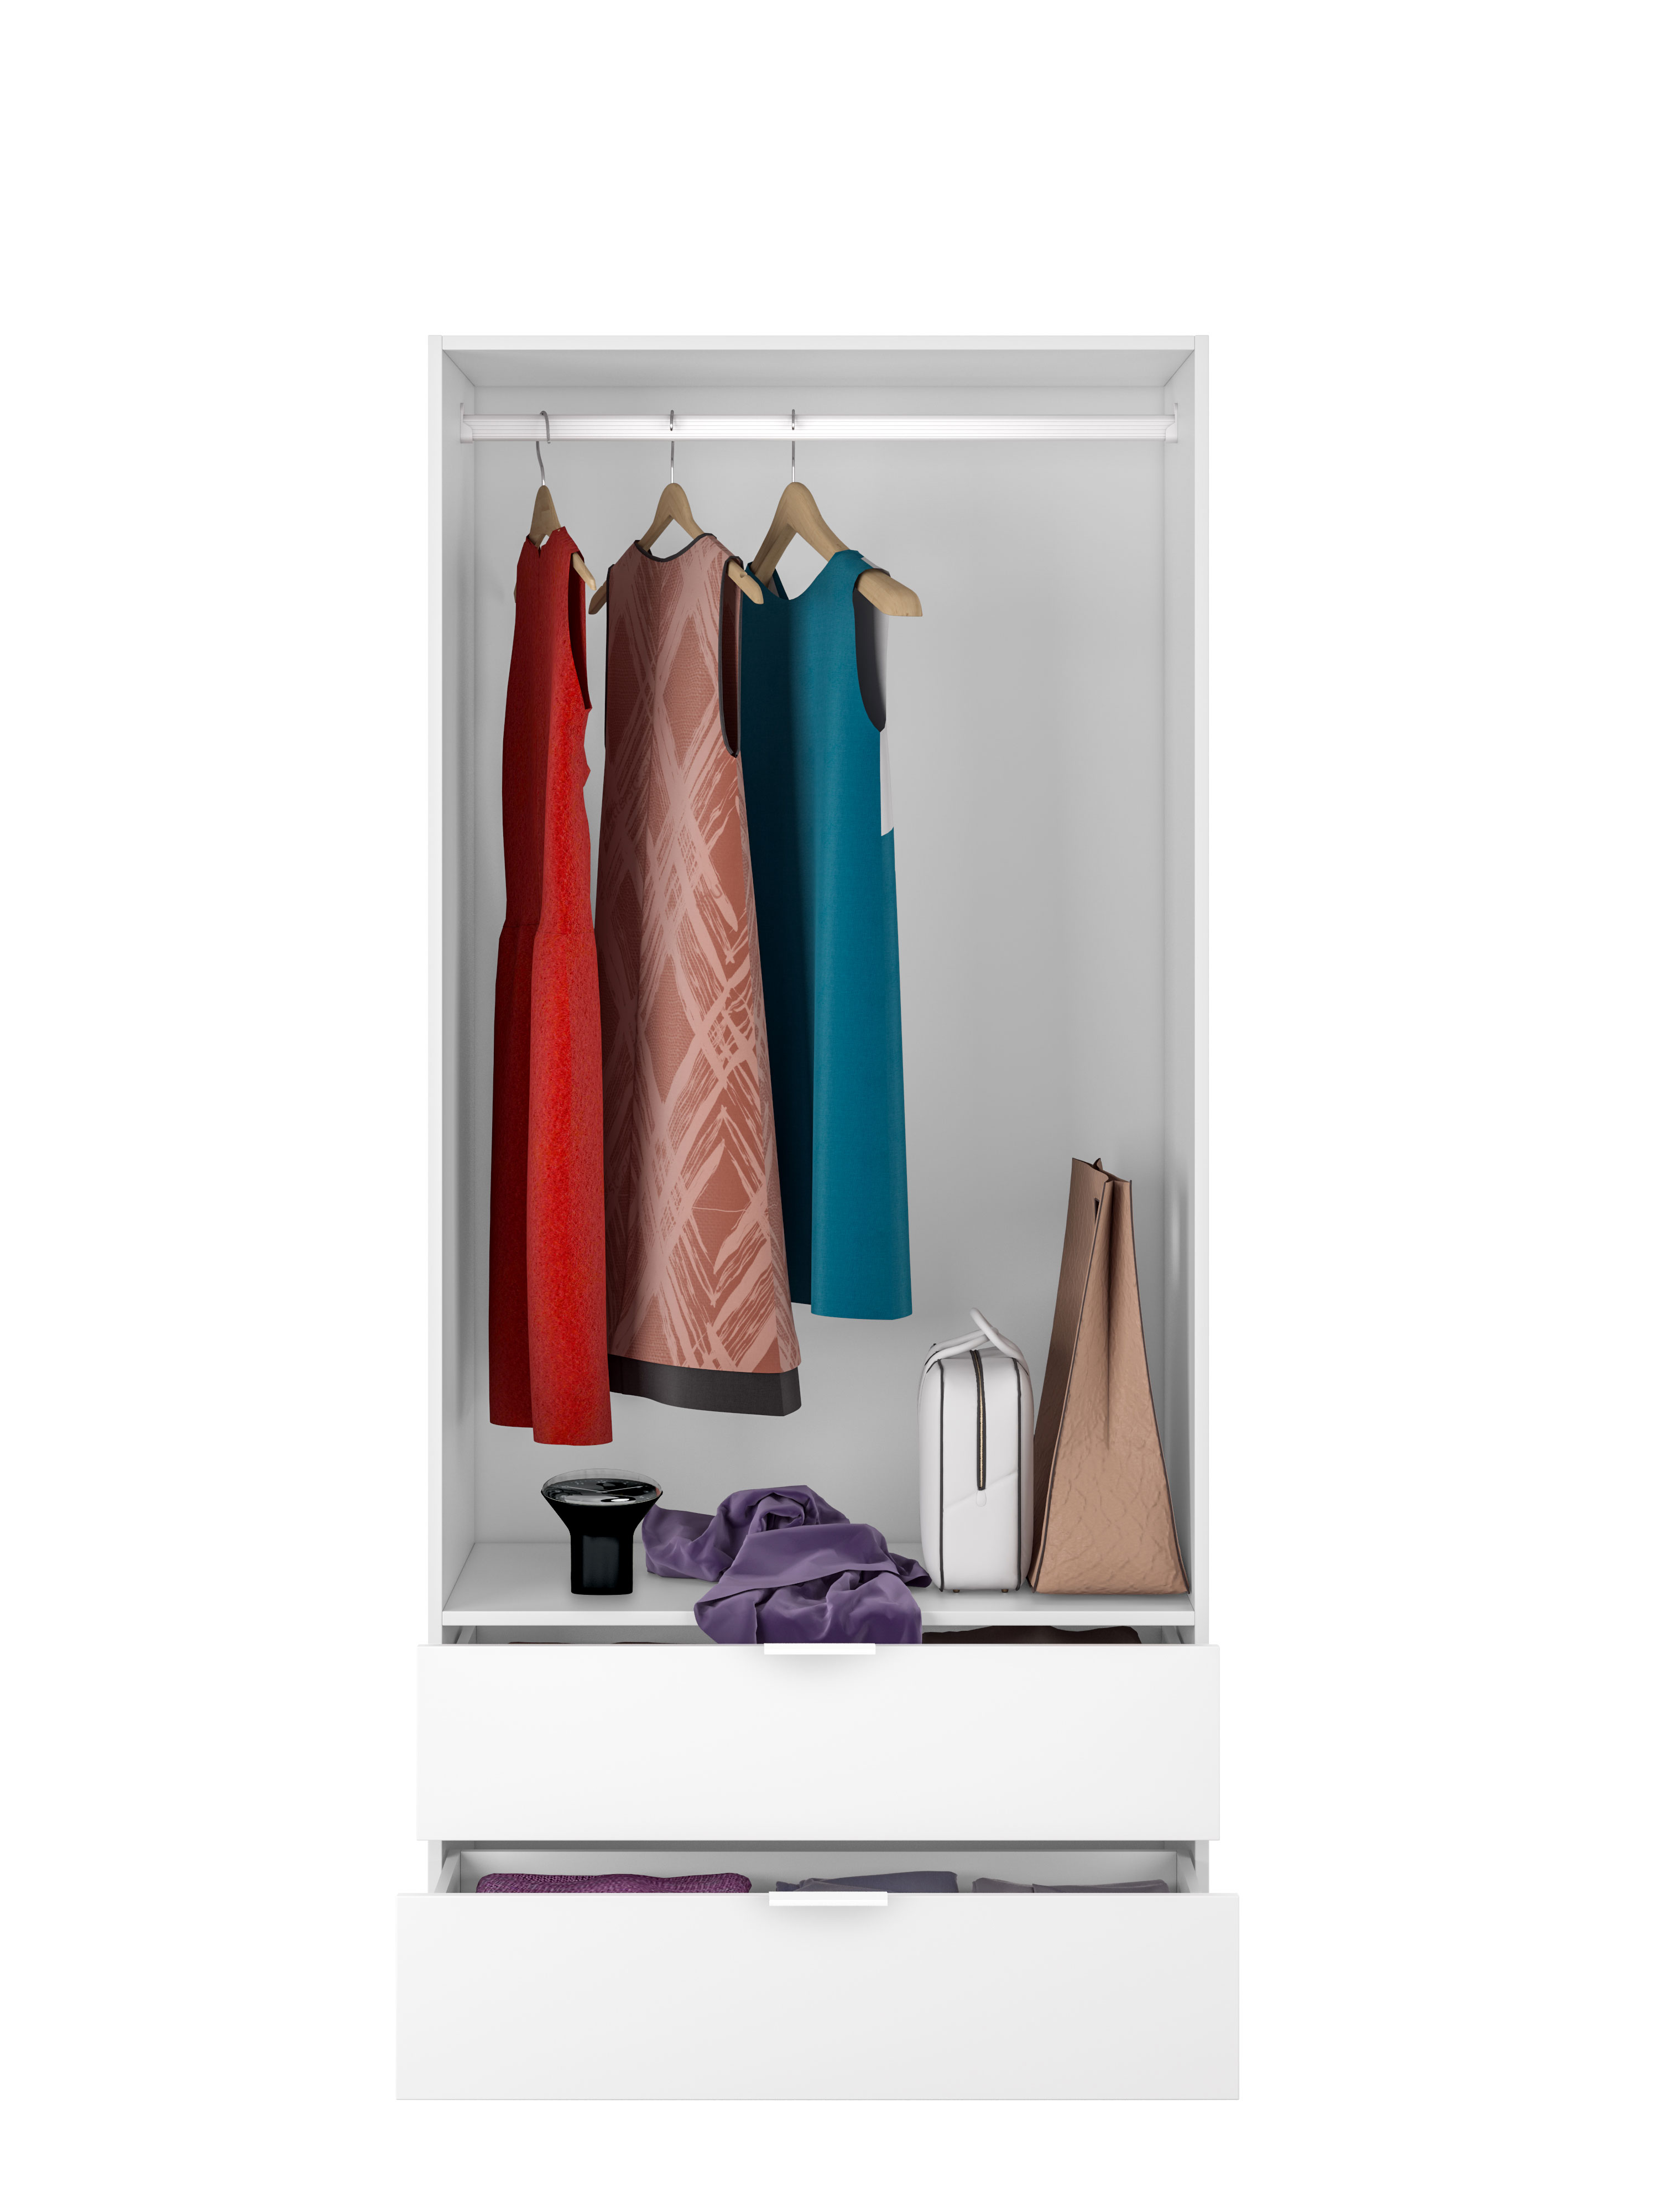 FORES LCX222O WARDROBE 2 DOORS AND 2 DRAWERS WHITE 180X81X52CM